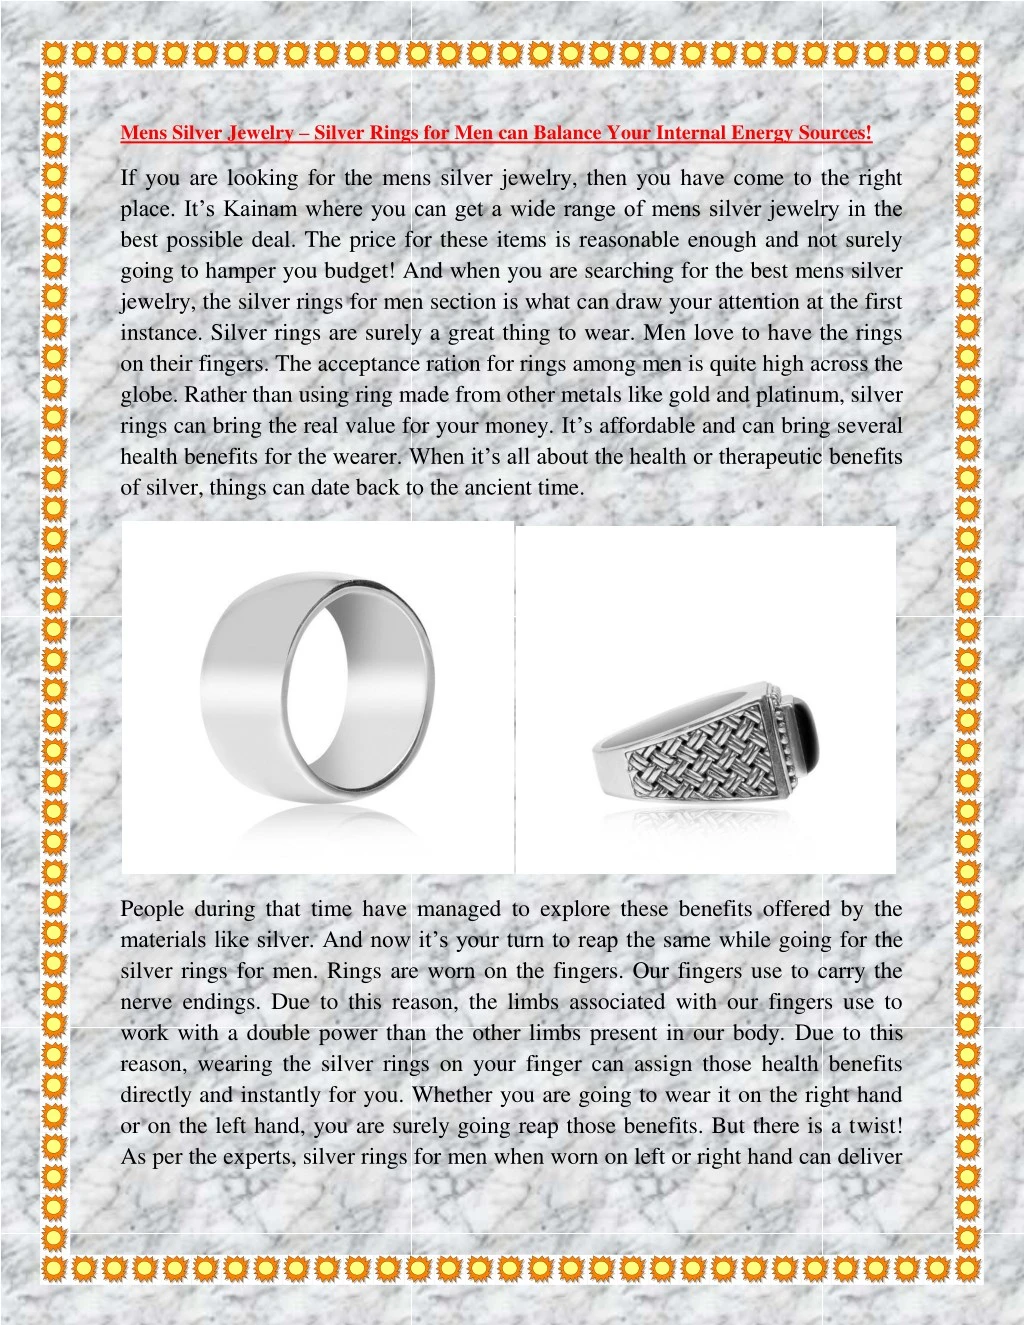 mens silver jewelry silver rings